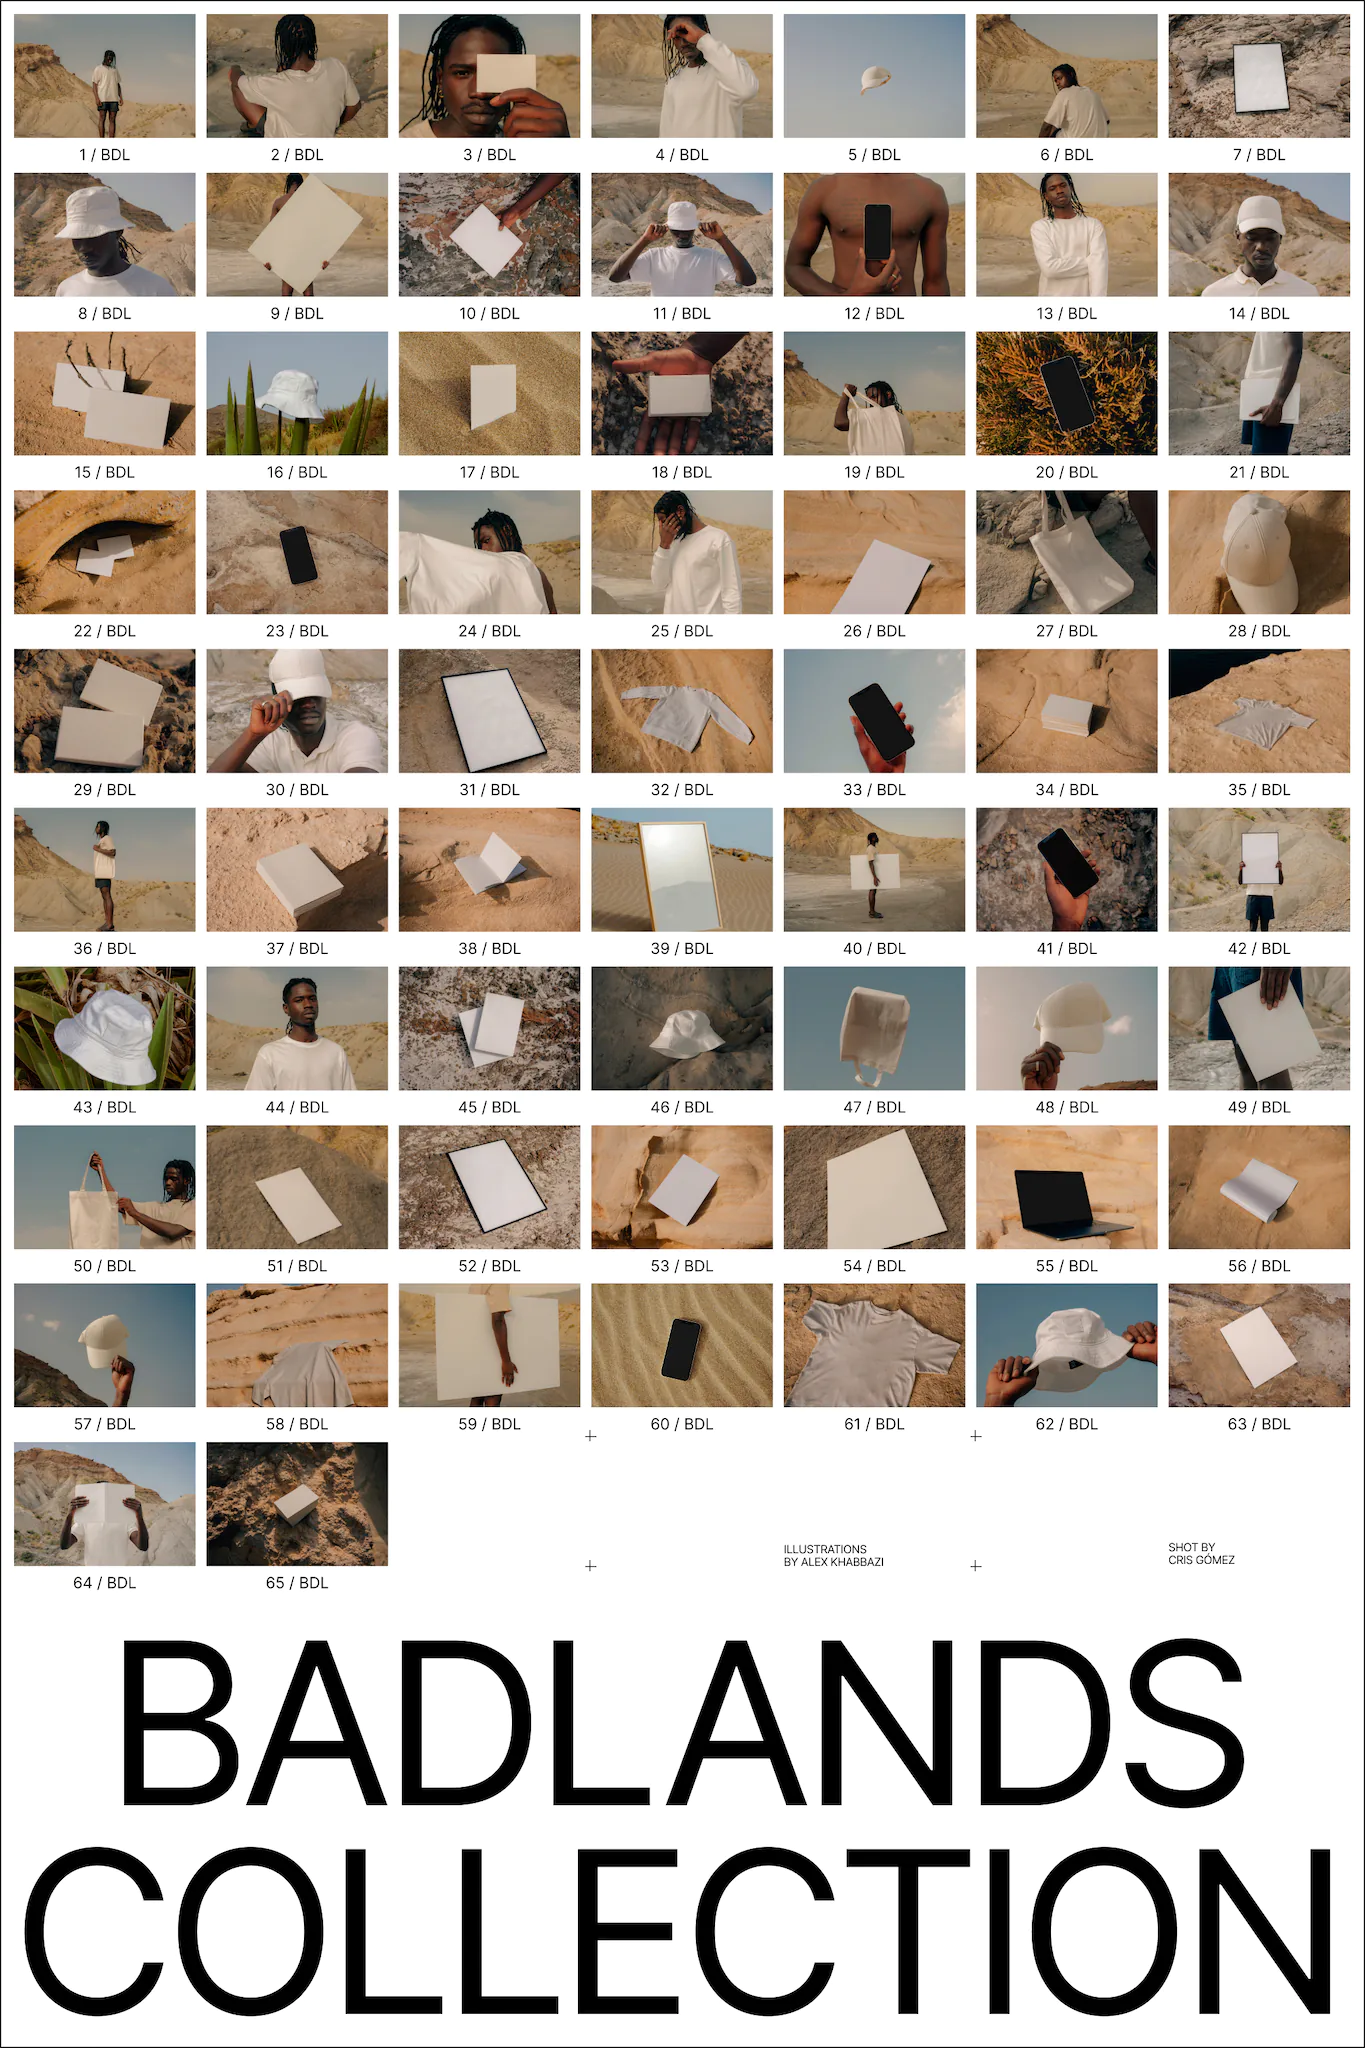 Image layout masonry that contains the 65 images from Badlands Collection, with all the mockups photographed in the desert.